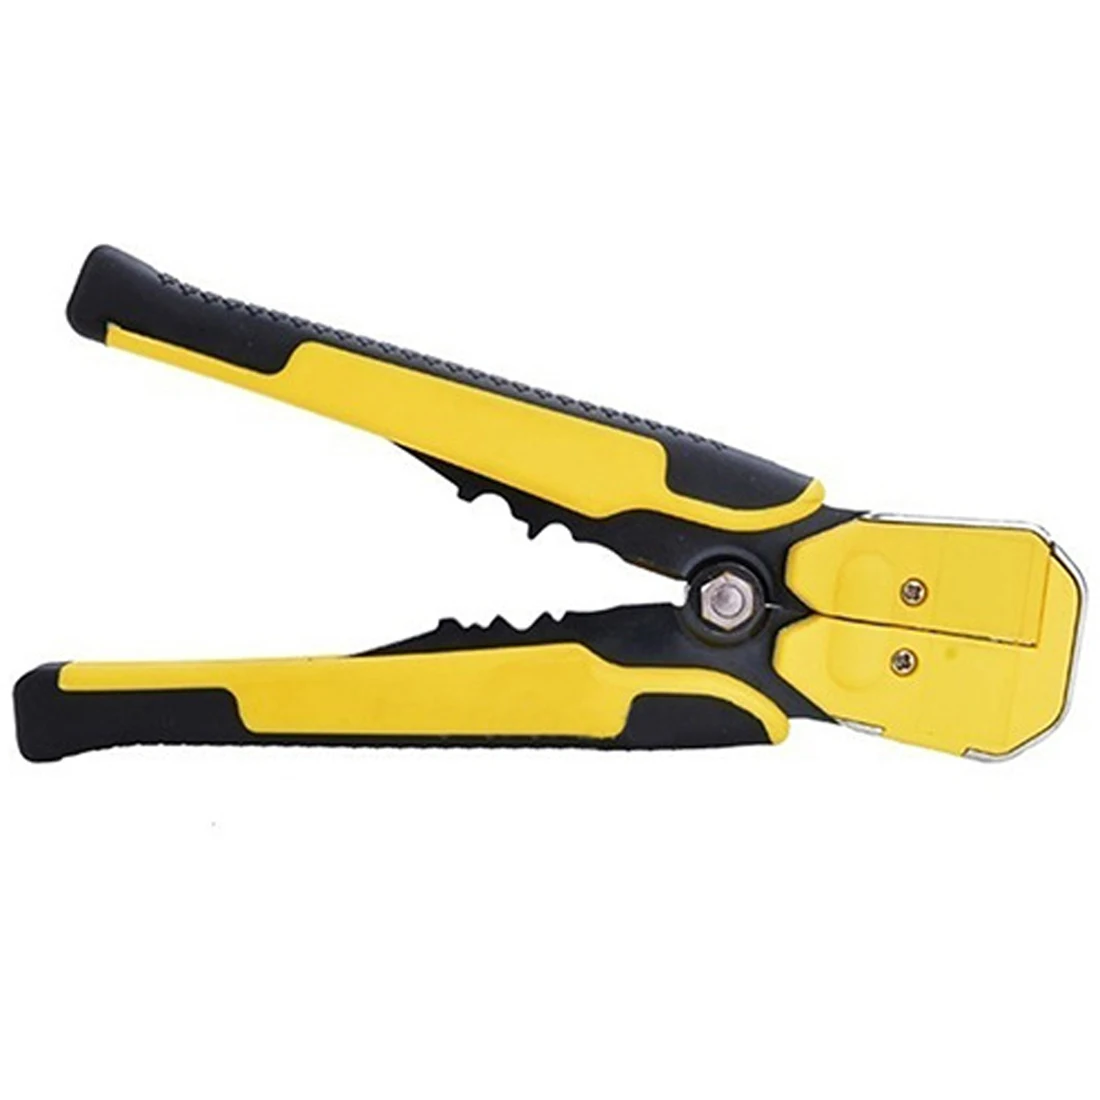 

Crimping Terminal Cutting and Stripping Wire Hand Tools 0.2-6.0mm Automatic Wire Striper Cutter Stripper Crimper Pliers